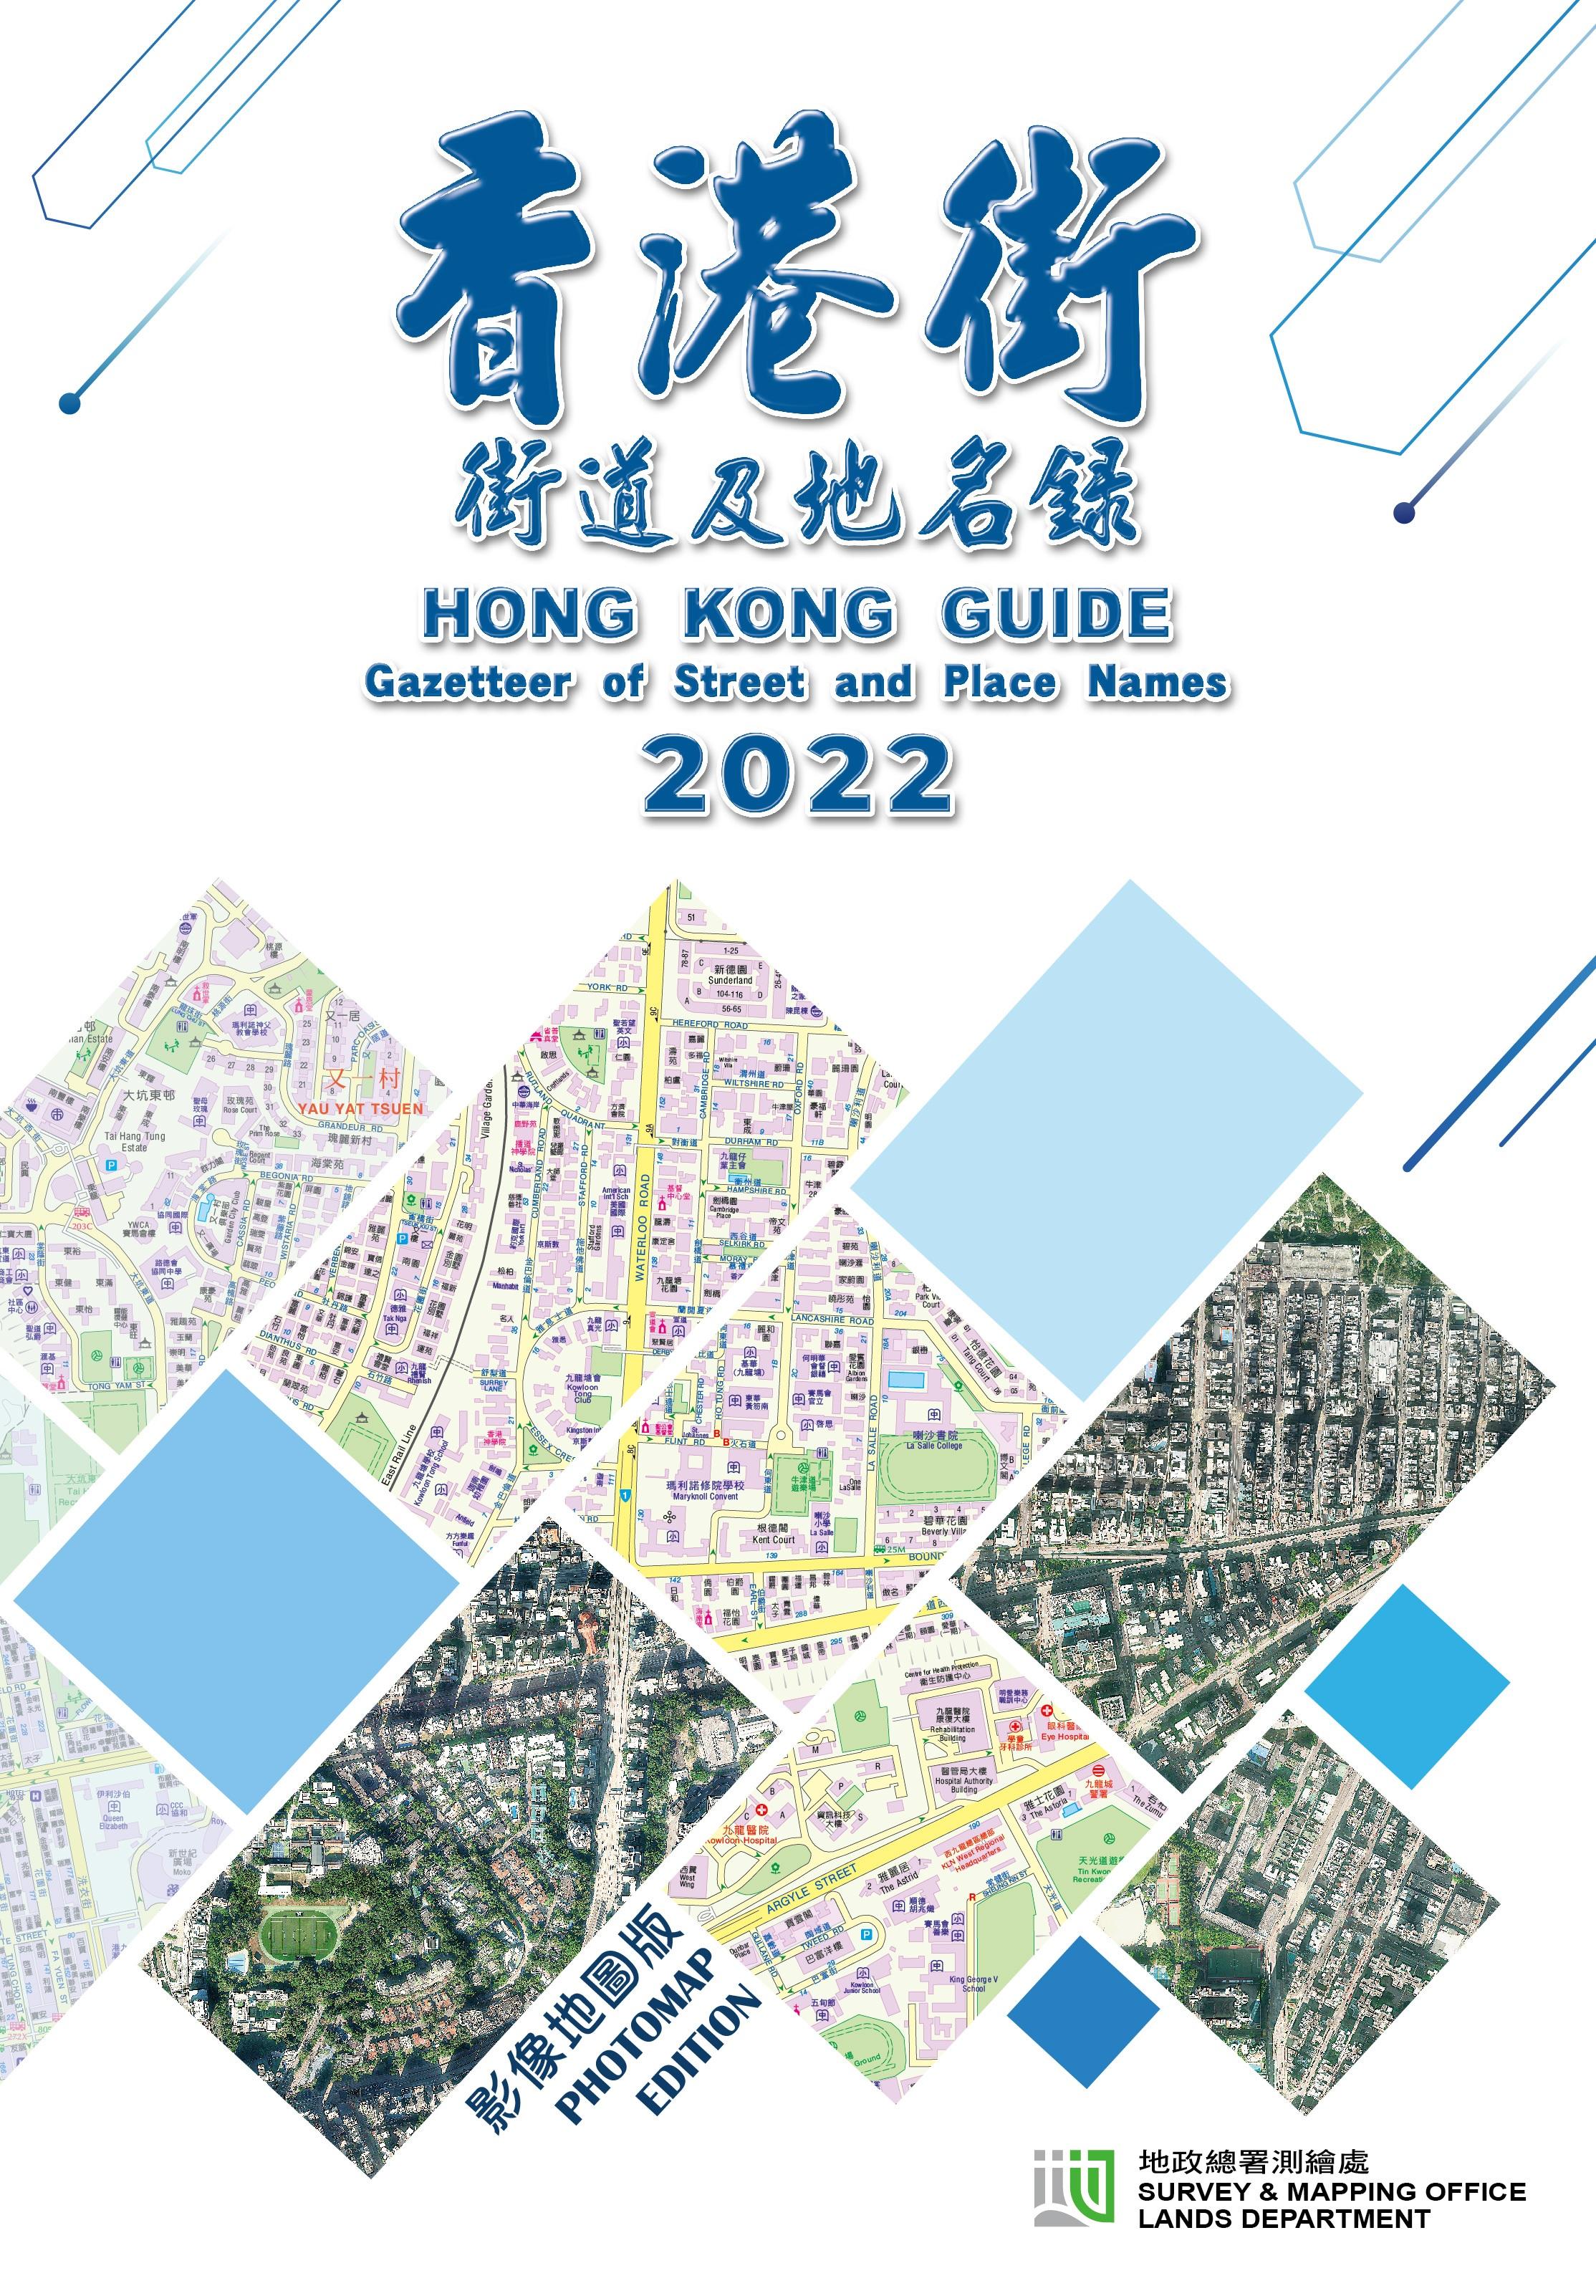 The "Hong Kong Guide" photomap edition 2022 went on sale today (January 25).